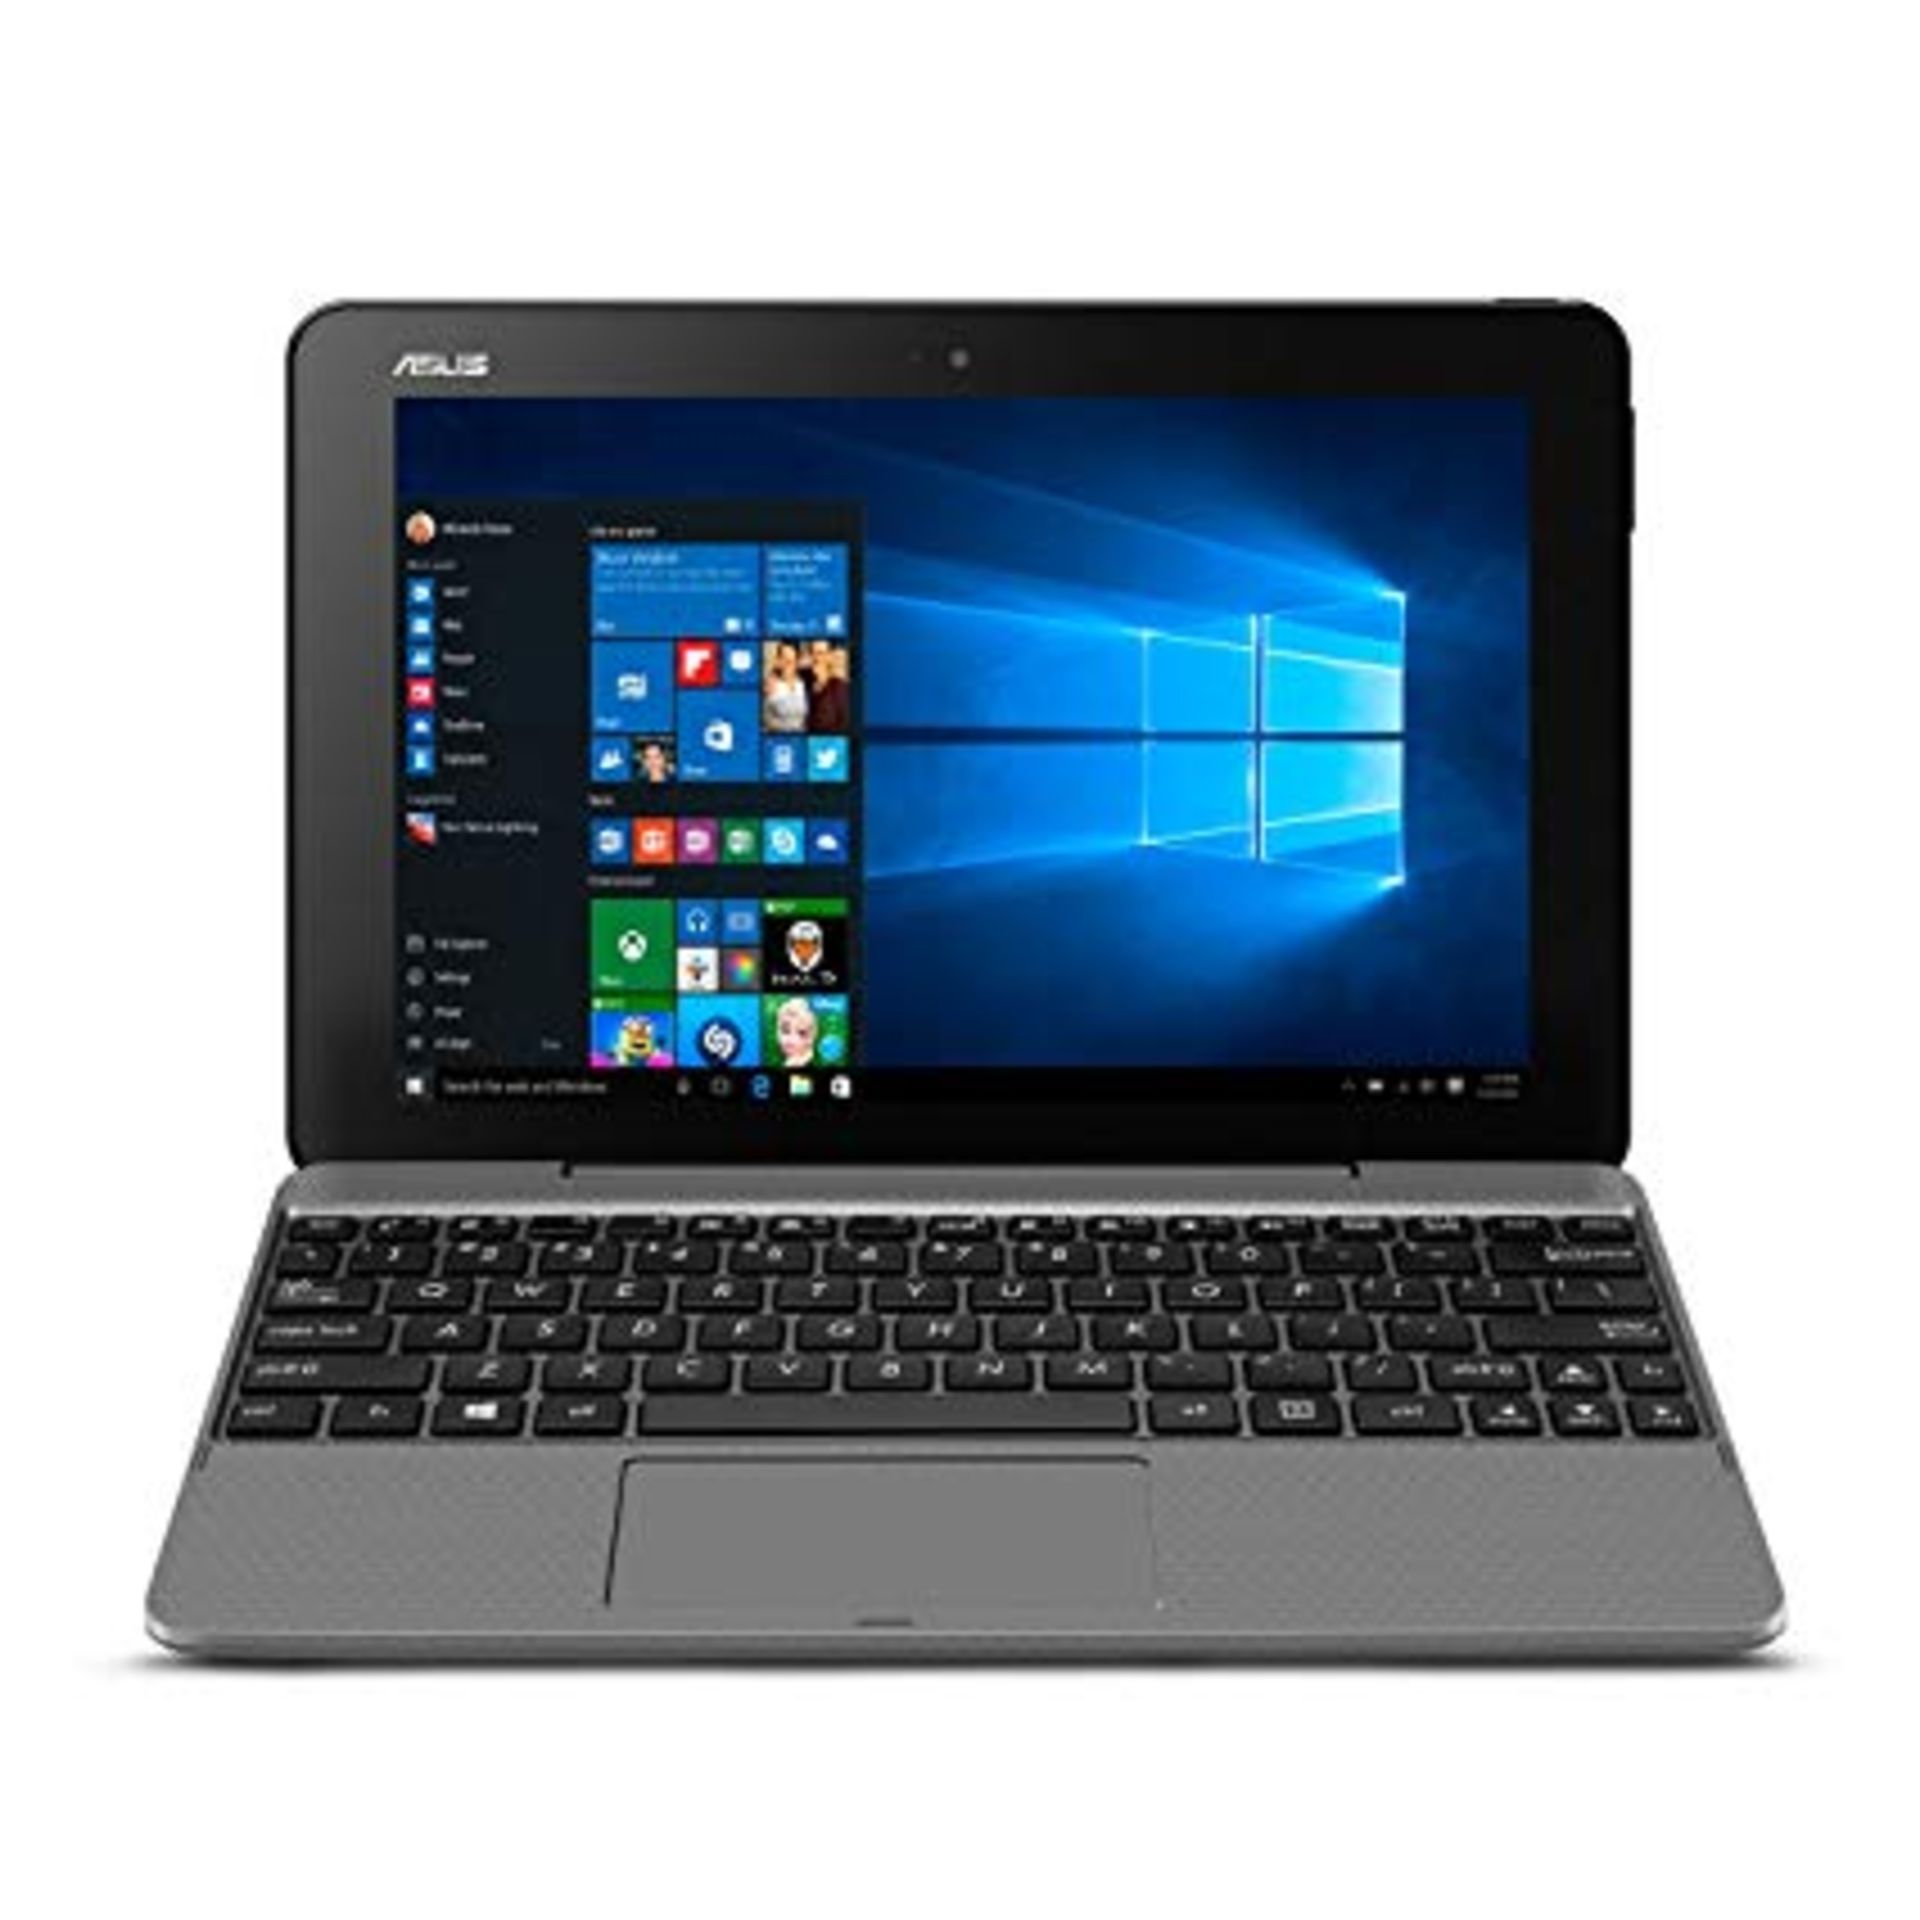 V Grade A Asus W-T101HA-GR001T Transformer Book - Quad Core Up To 1.92 Ghz - 2GB Ram - 32 GB HD - - Image 2 of 2